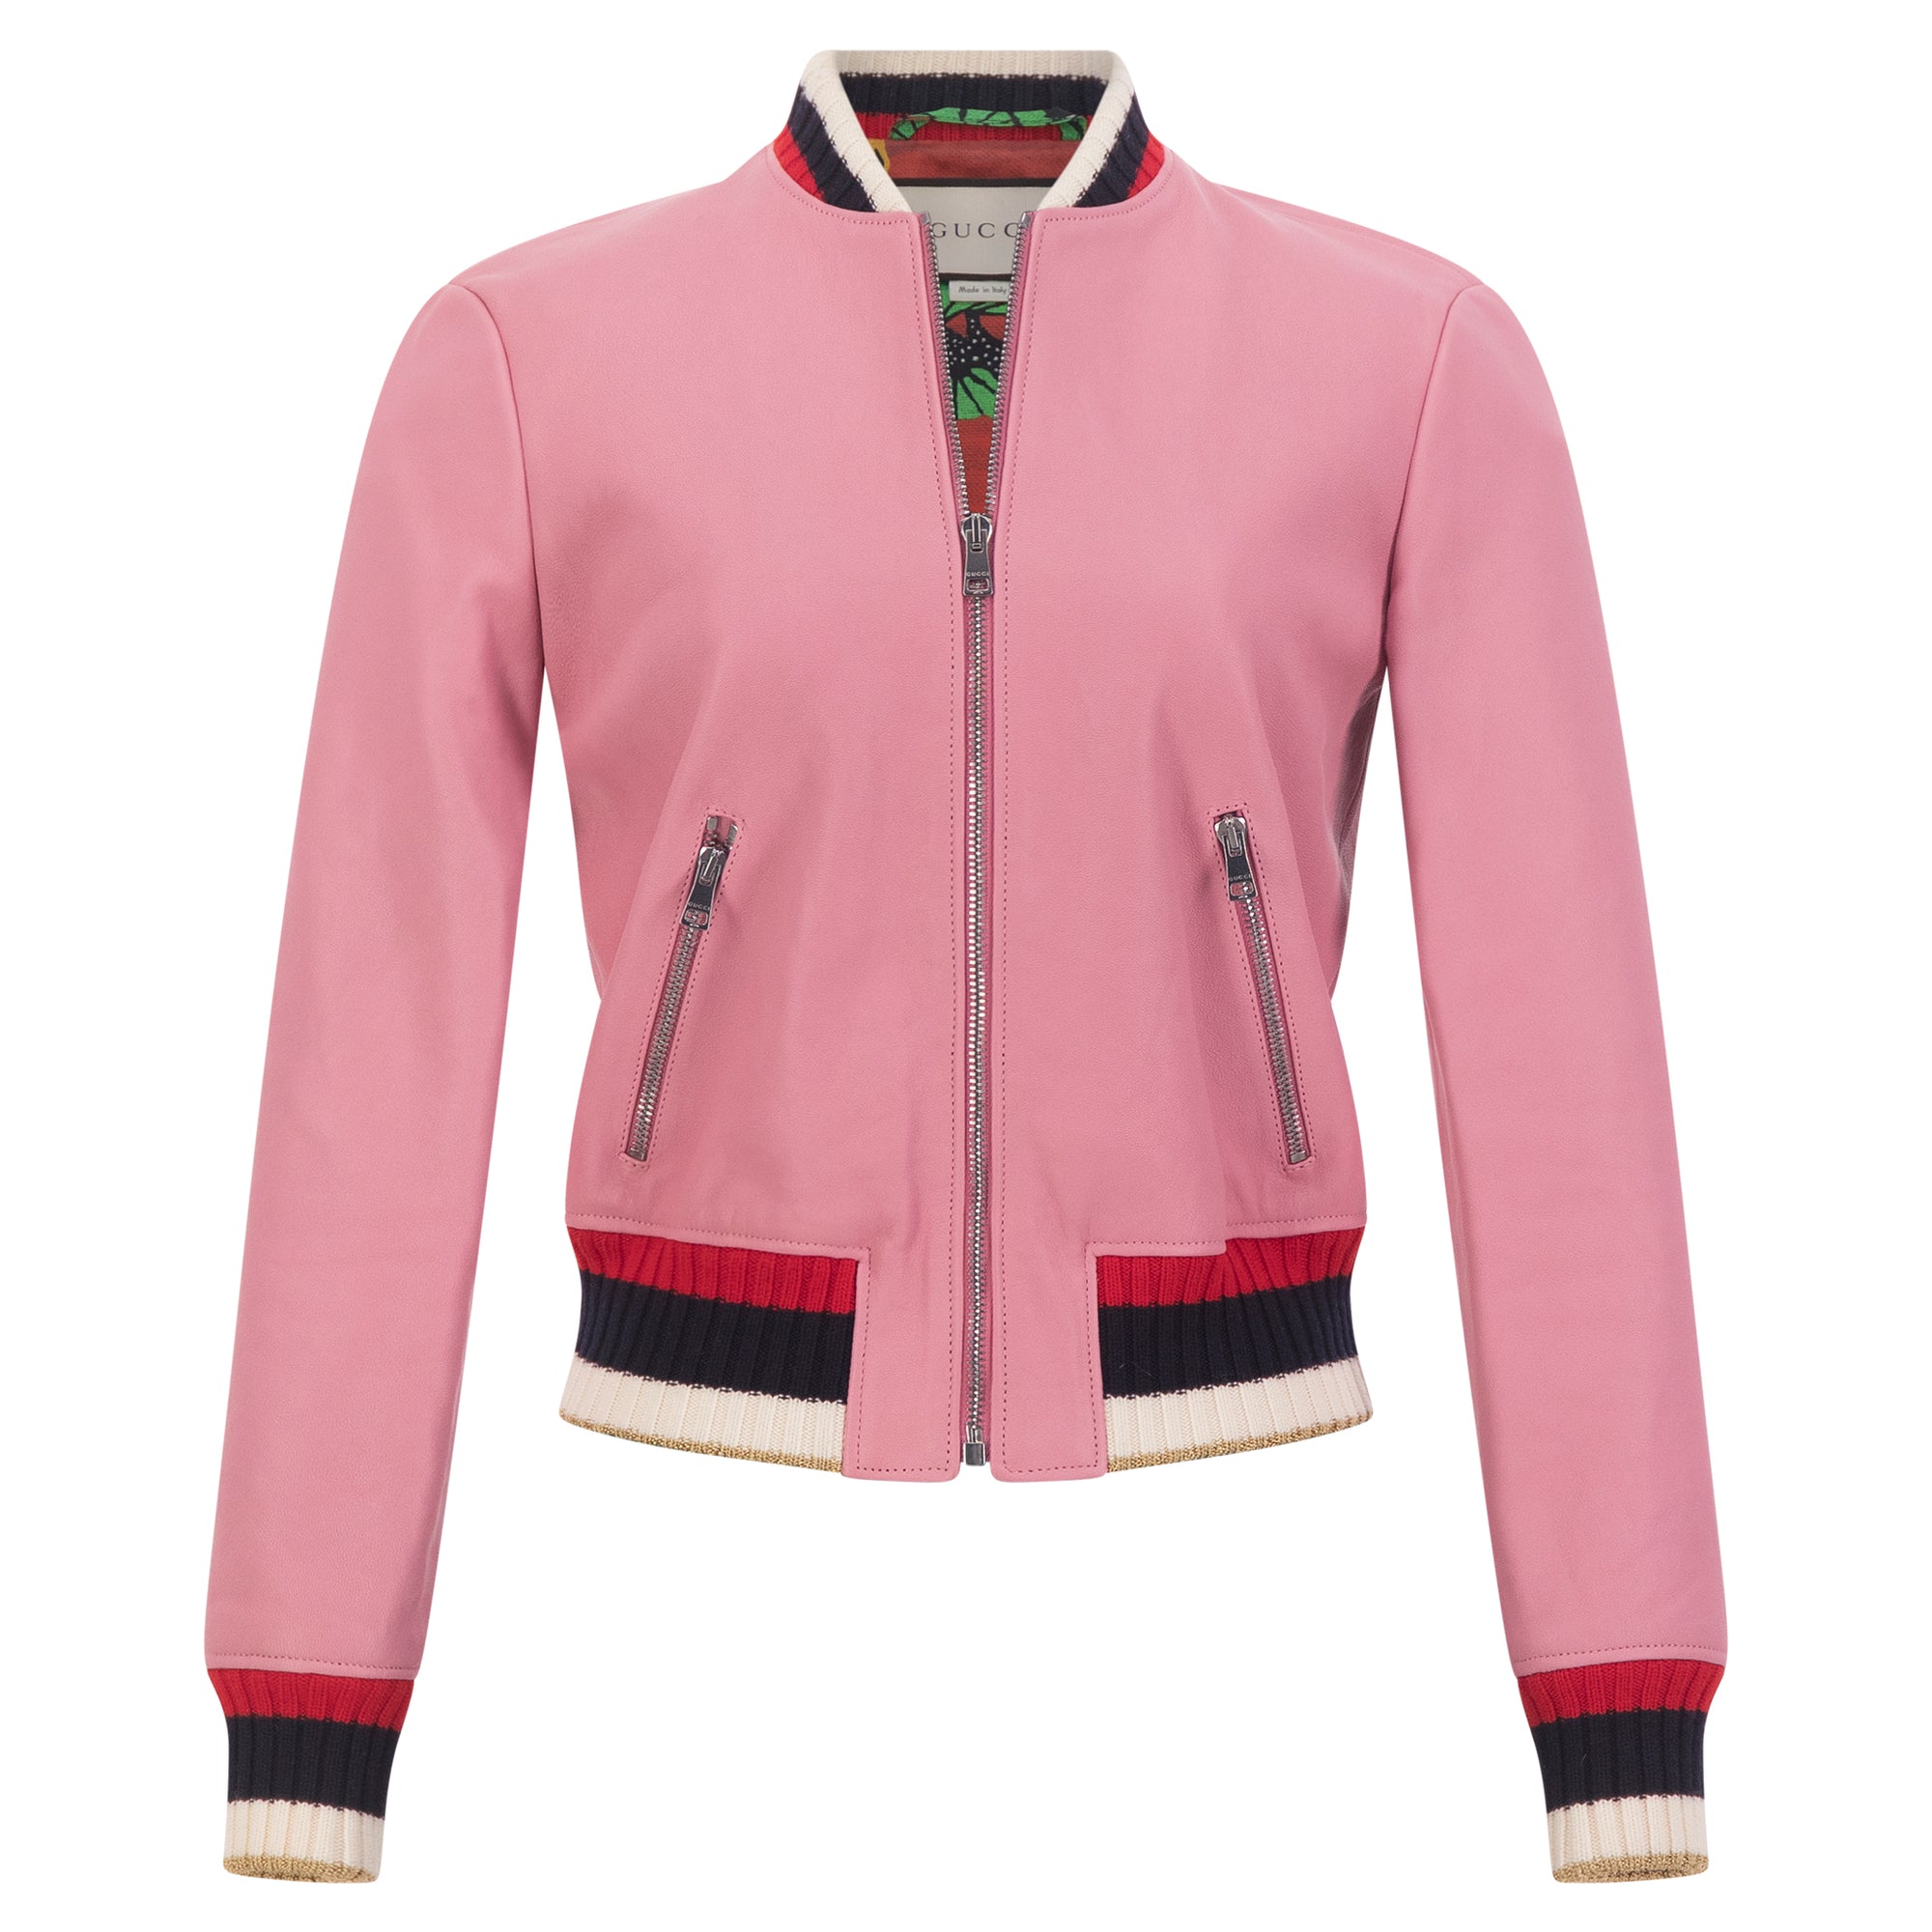 Gucci Blind For Love Bomber Jacket - Dream Closet by Sira Pevida